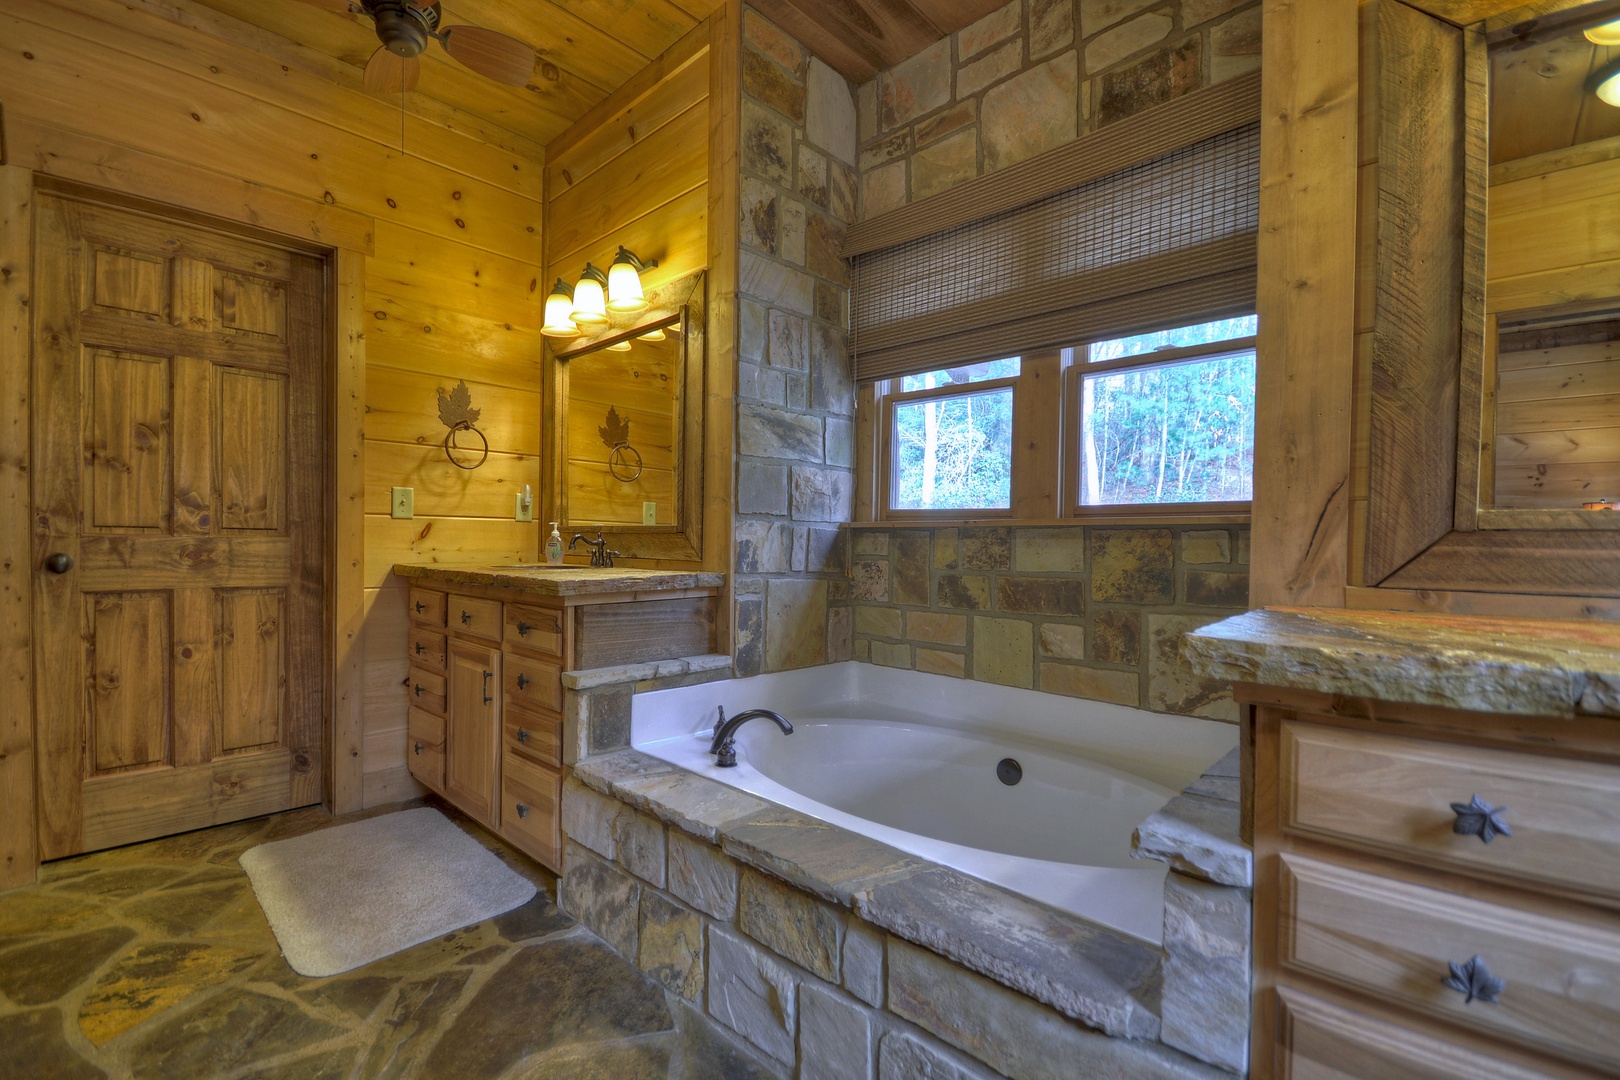 Reel Creek Lodge- Private bathroom with a stone garden tub and vanity sinks